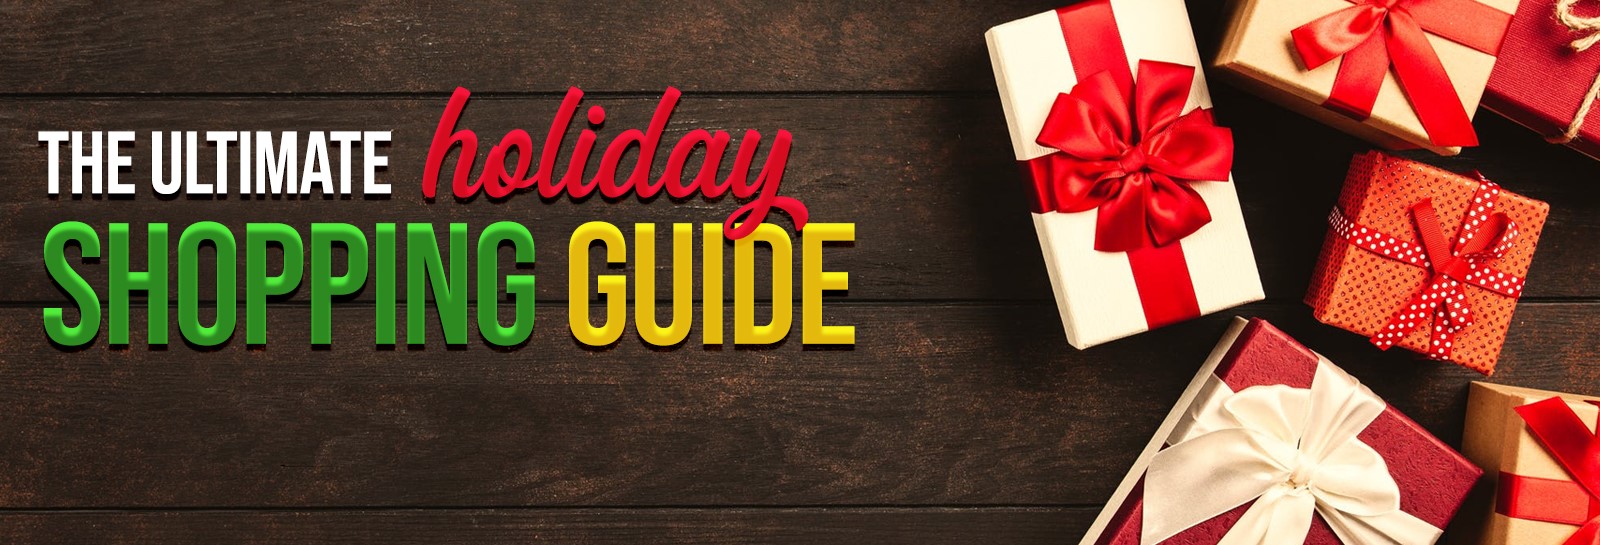 Ultimate Holiday Shopping Guide Edited